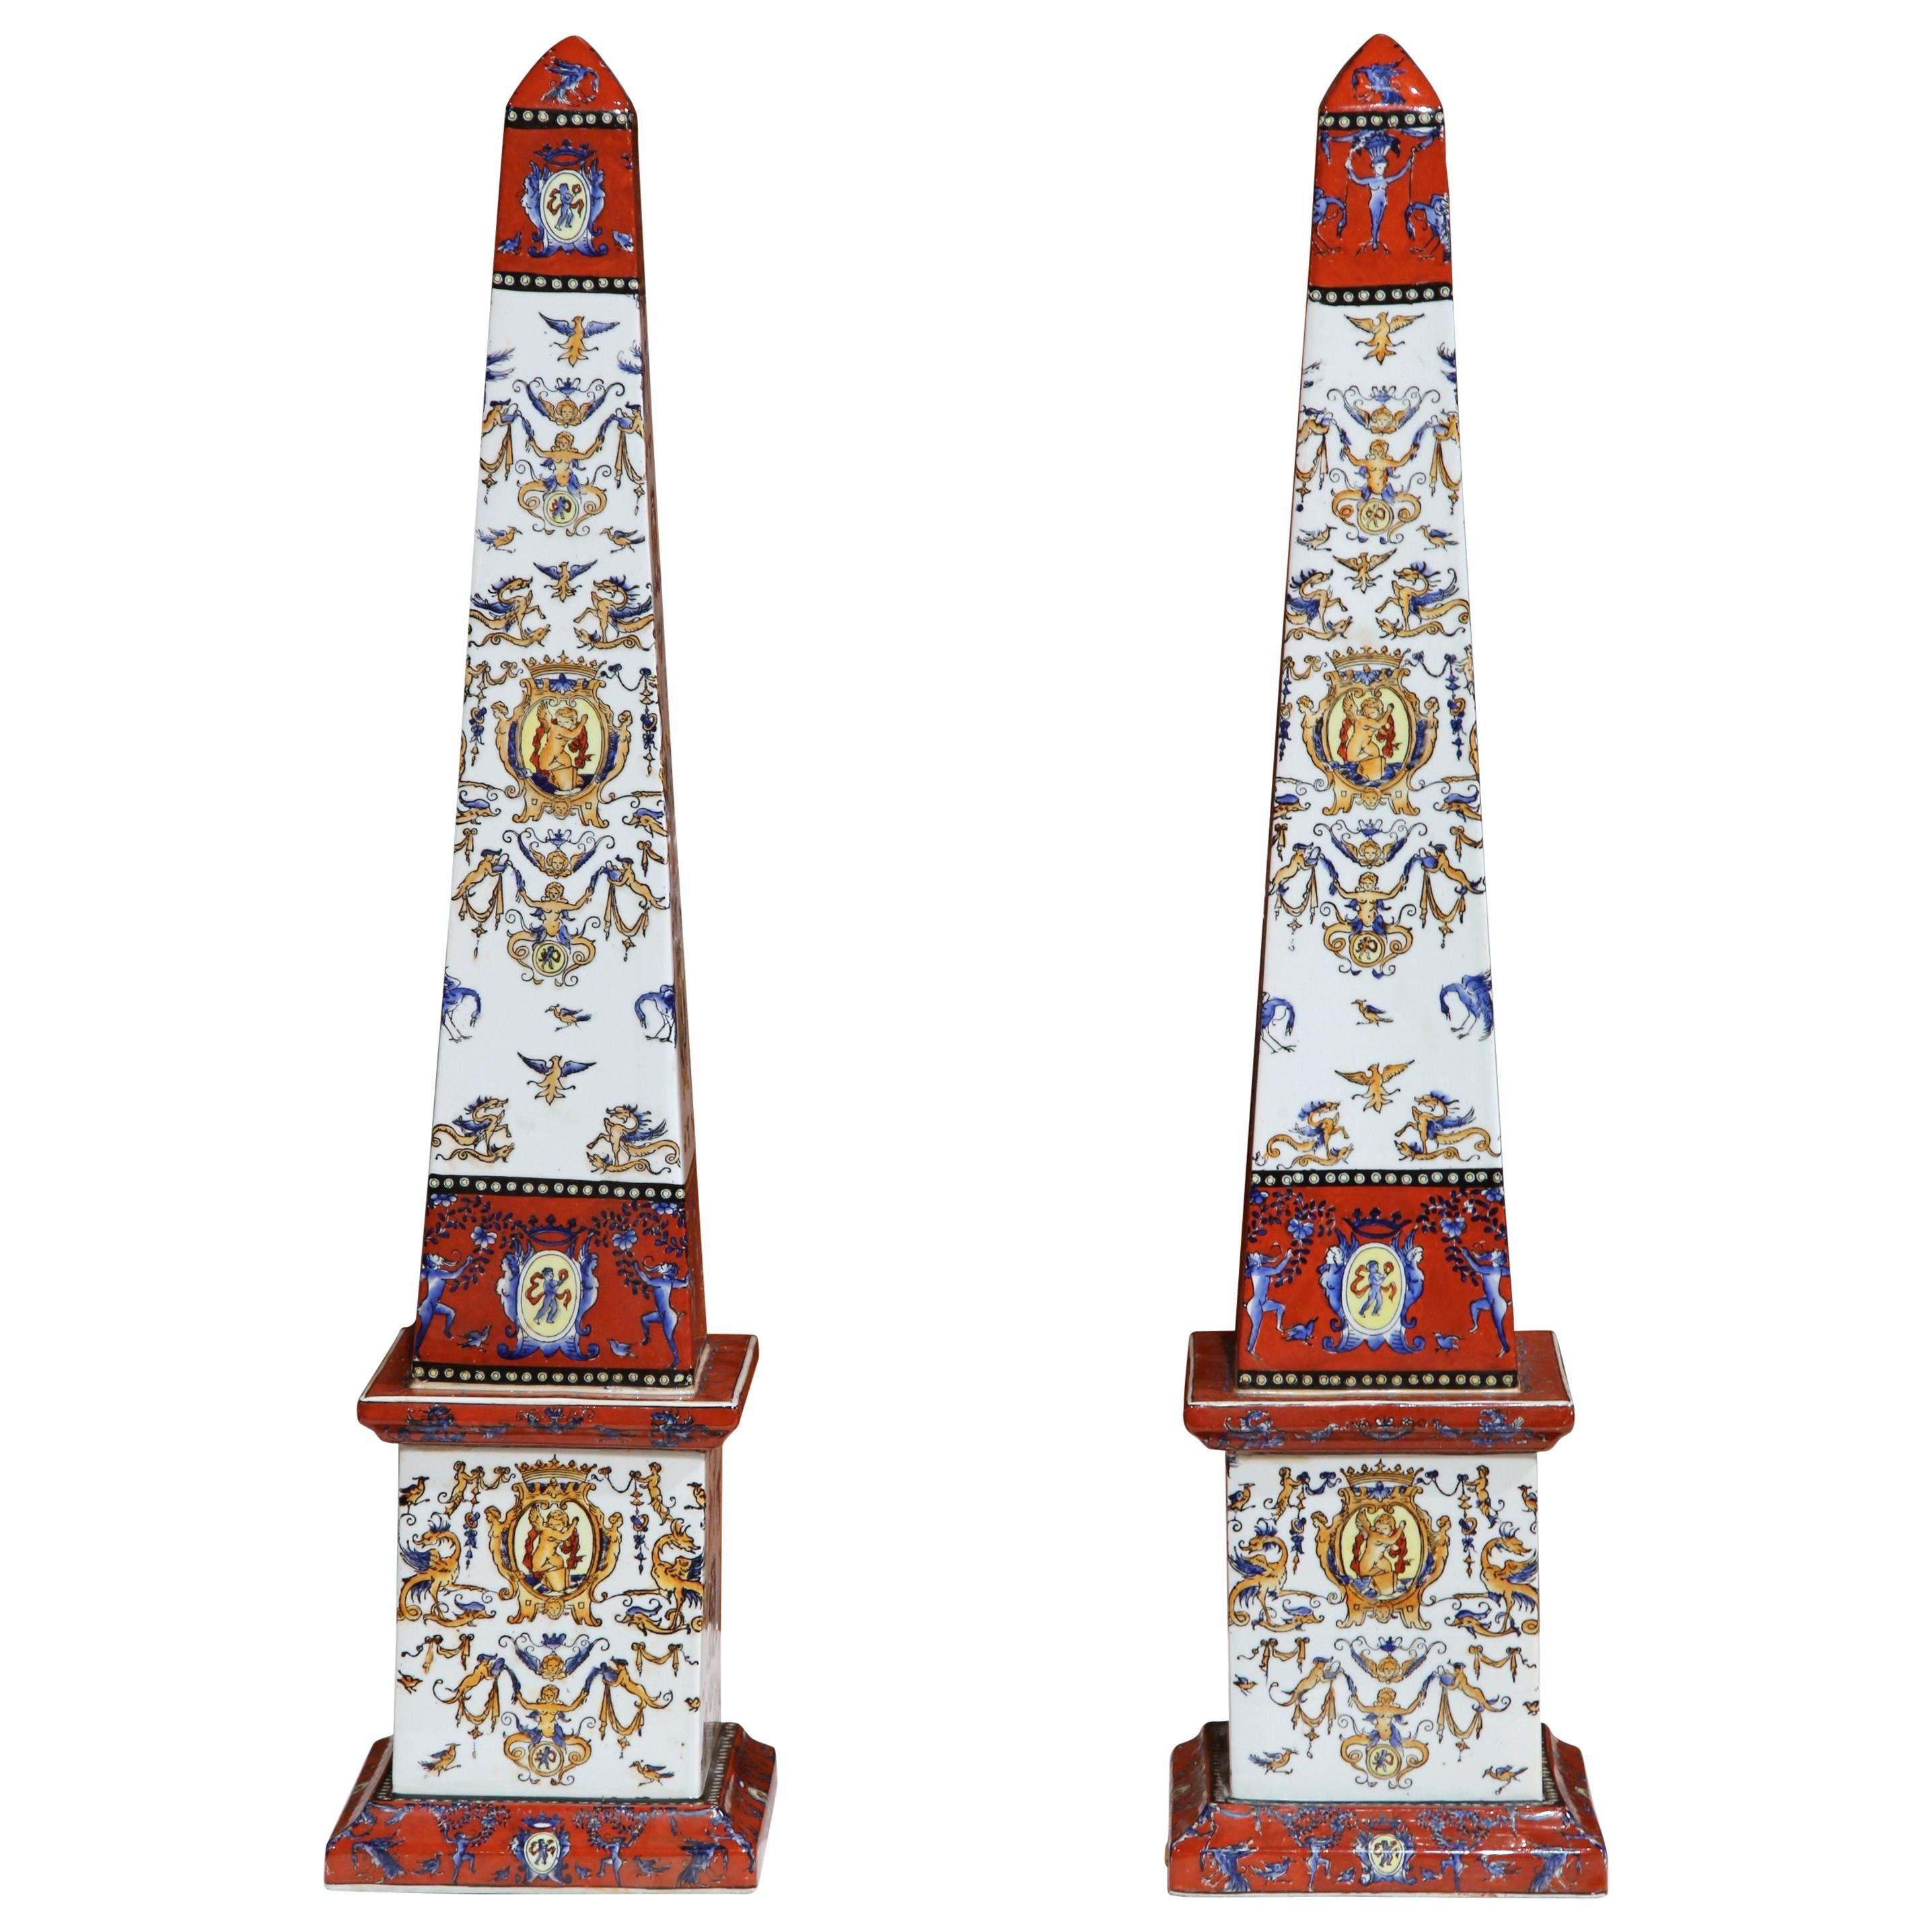 Pair of 19th Century French Hand-Painted Faience Obelisks from Gien